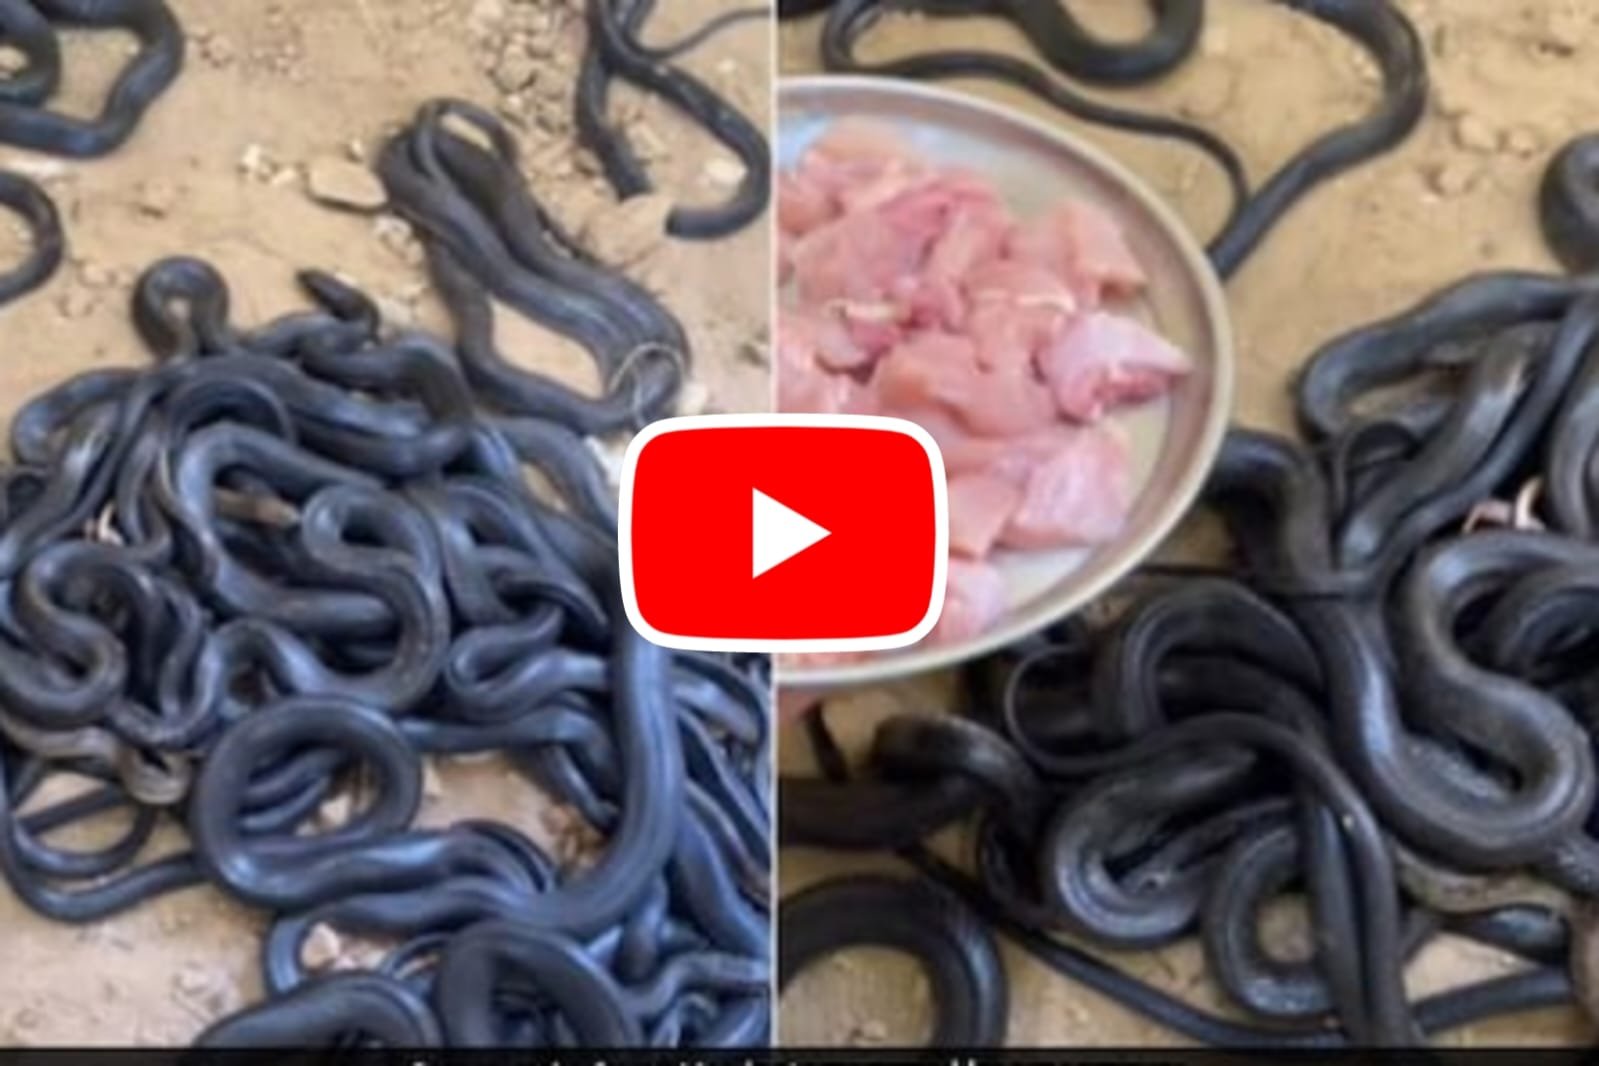 Video of Cobra Saanp: Food served to many cobras in a plate